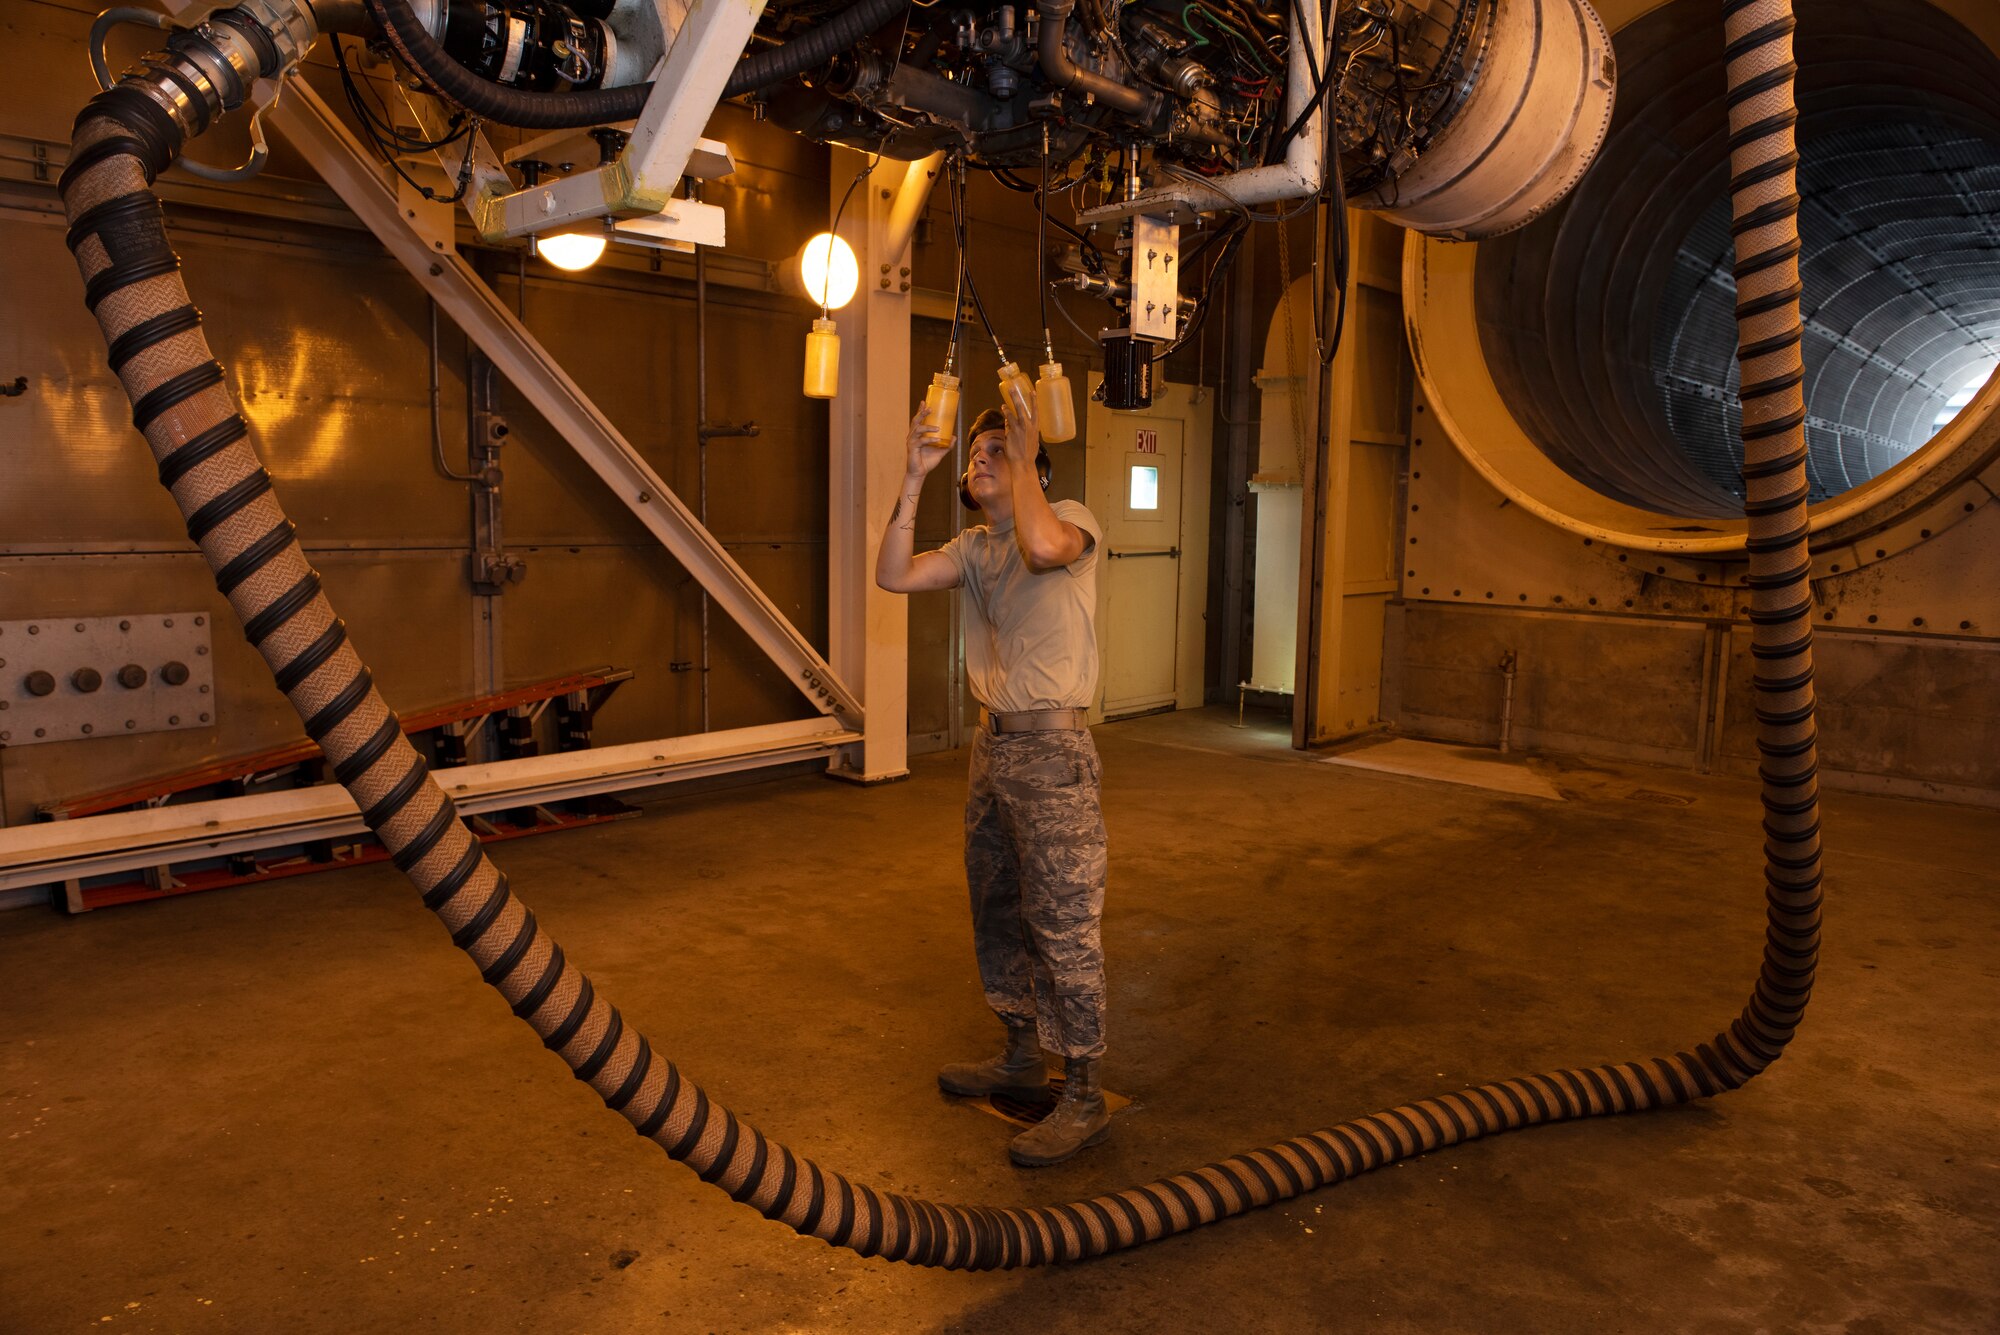 Airman 1st Class Kyle Jacob, an aerospace propulsion Airman assigned the 509th Maintenance Squadron, checks fluid levels on a F-118 engine before diagnostic testing on July 9, 2019, at Whiteman Air Force Base, Missouri. Jacob and other members of the jet propulsion flight work daily to ensure the fleet of B-2 Spirits at Whiteman AFB have the engines needed to accomplish the mission, with plenty to spare, giving Whiteman the highest readiness rate across the active-duty Air Force. (U.S. Air Force photo by Staff Sgt. Kayla White)